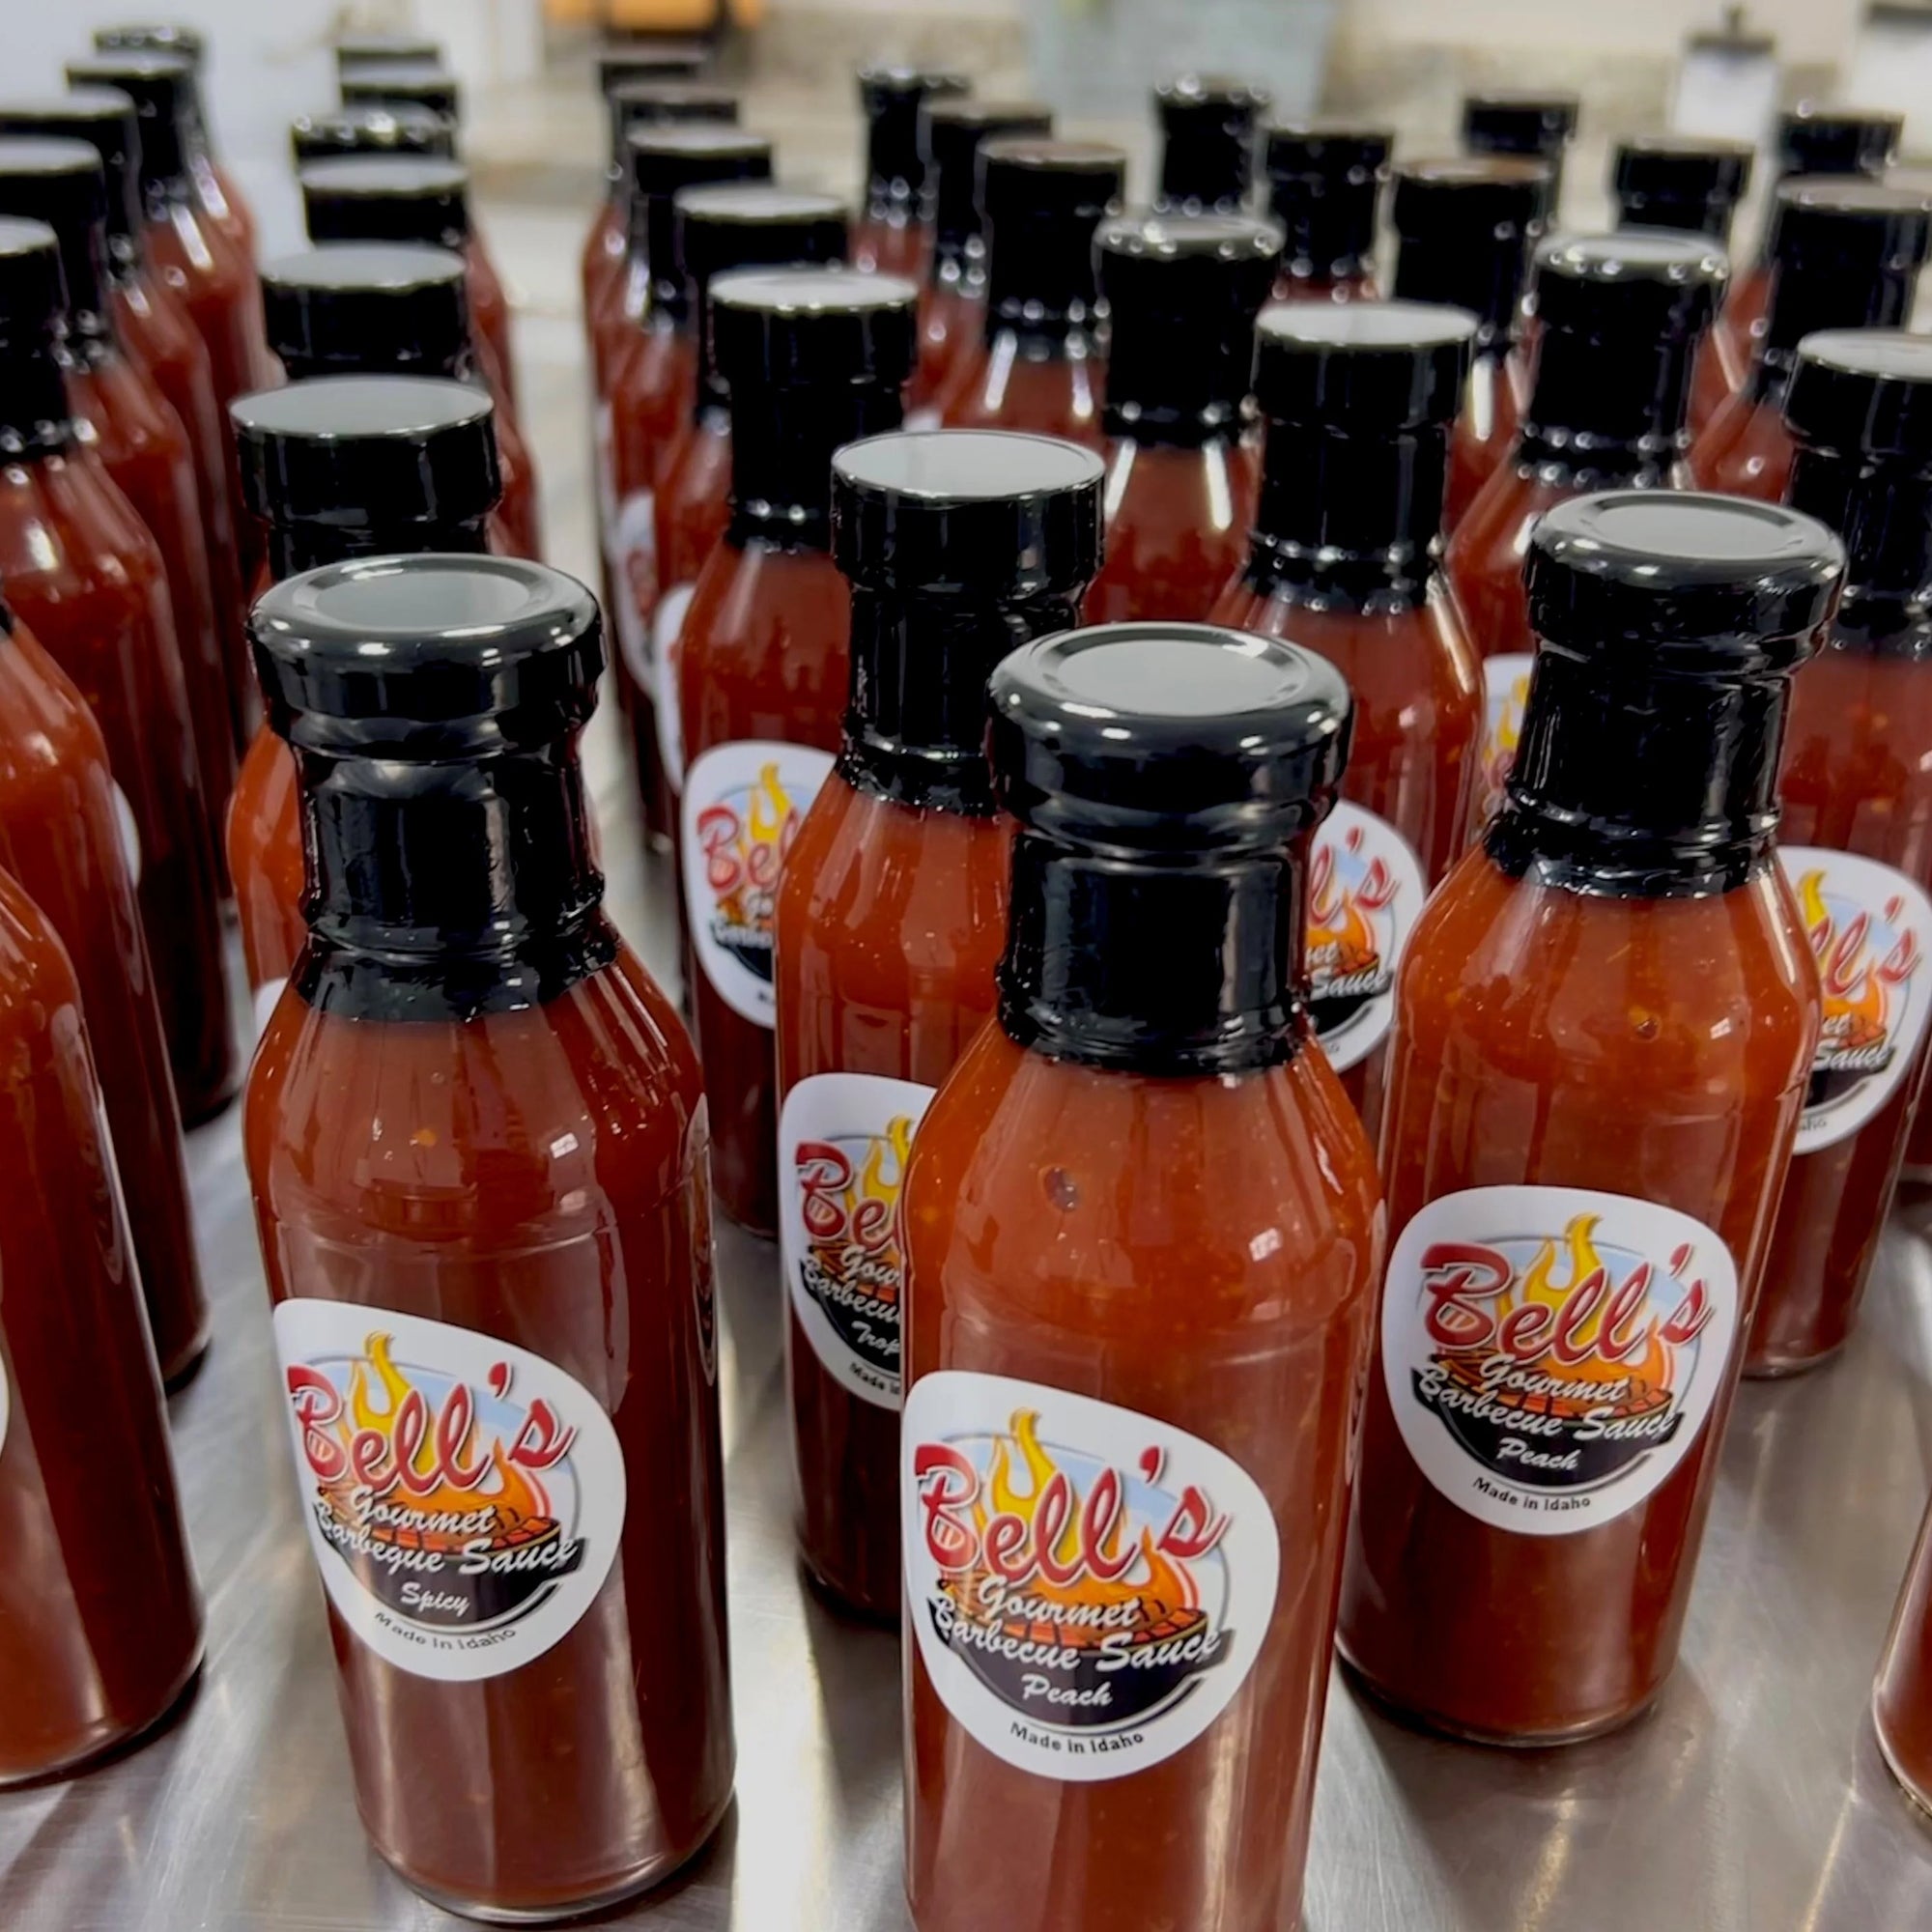 Bell's Homestyle Catering & BBQ Sauce